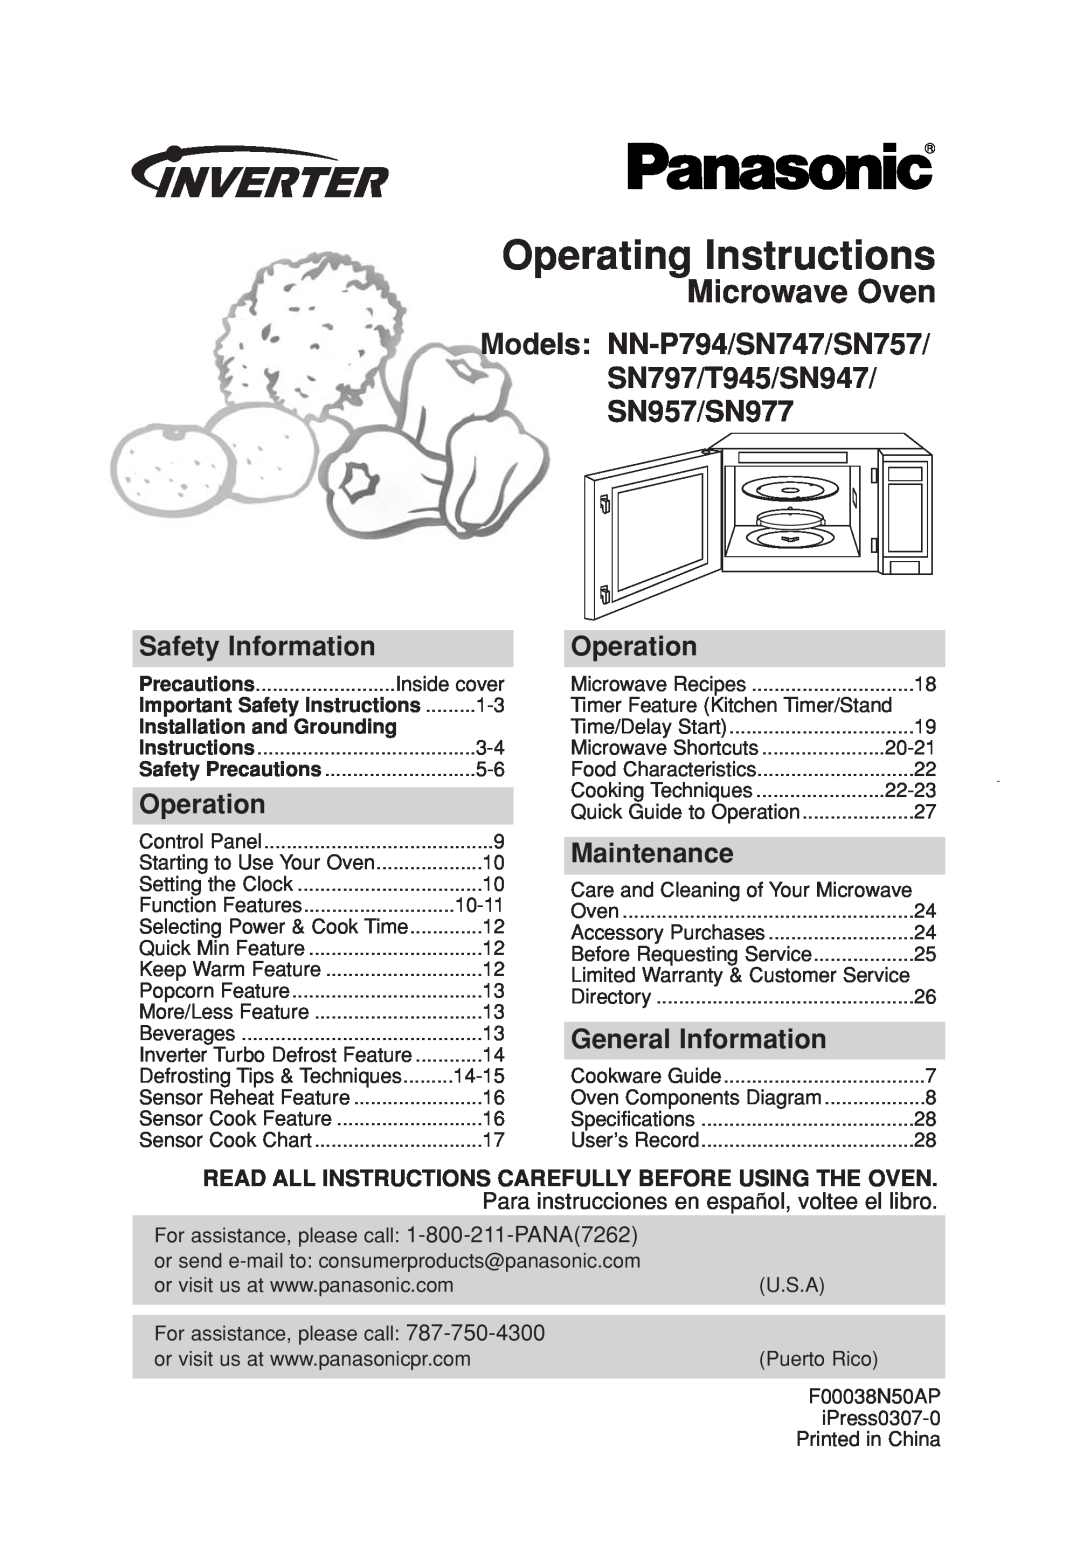 Panasonic NN-SN947 important safety instructions Operating Instructions, Microwave Oven, Safety Information, Operation 